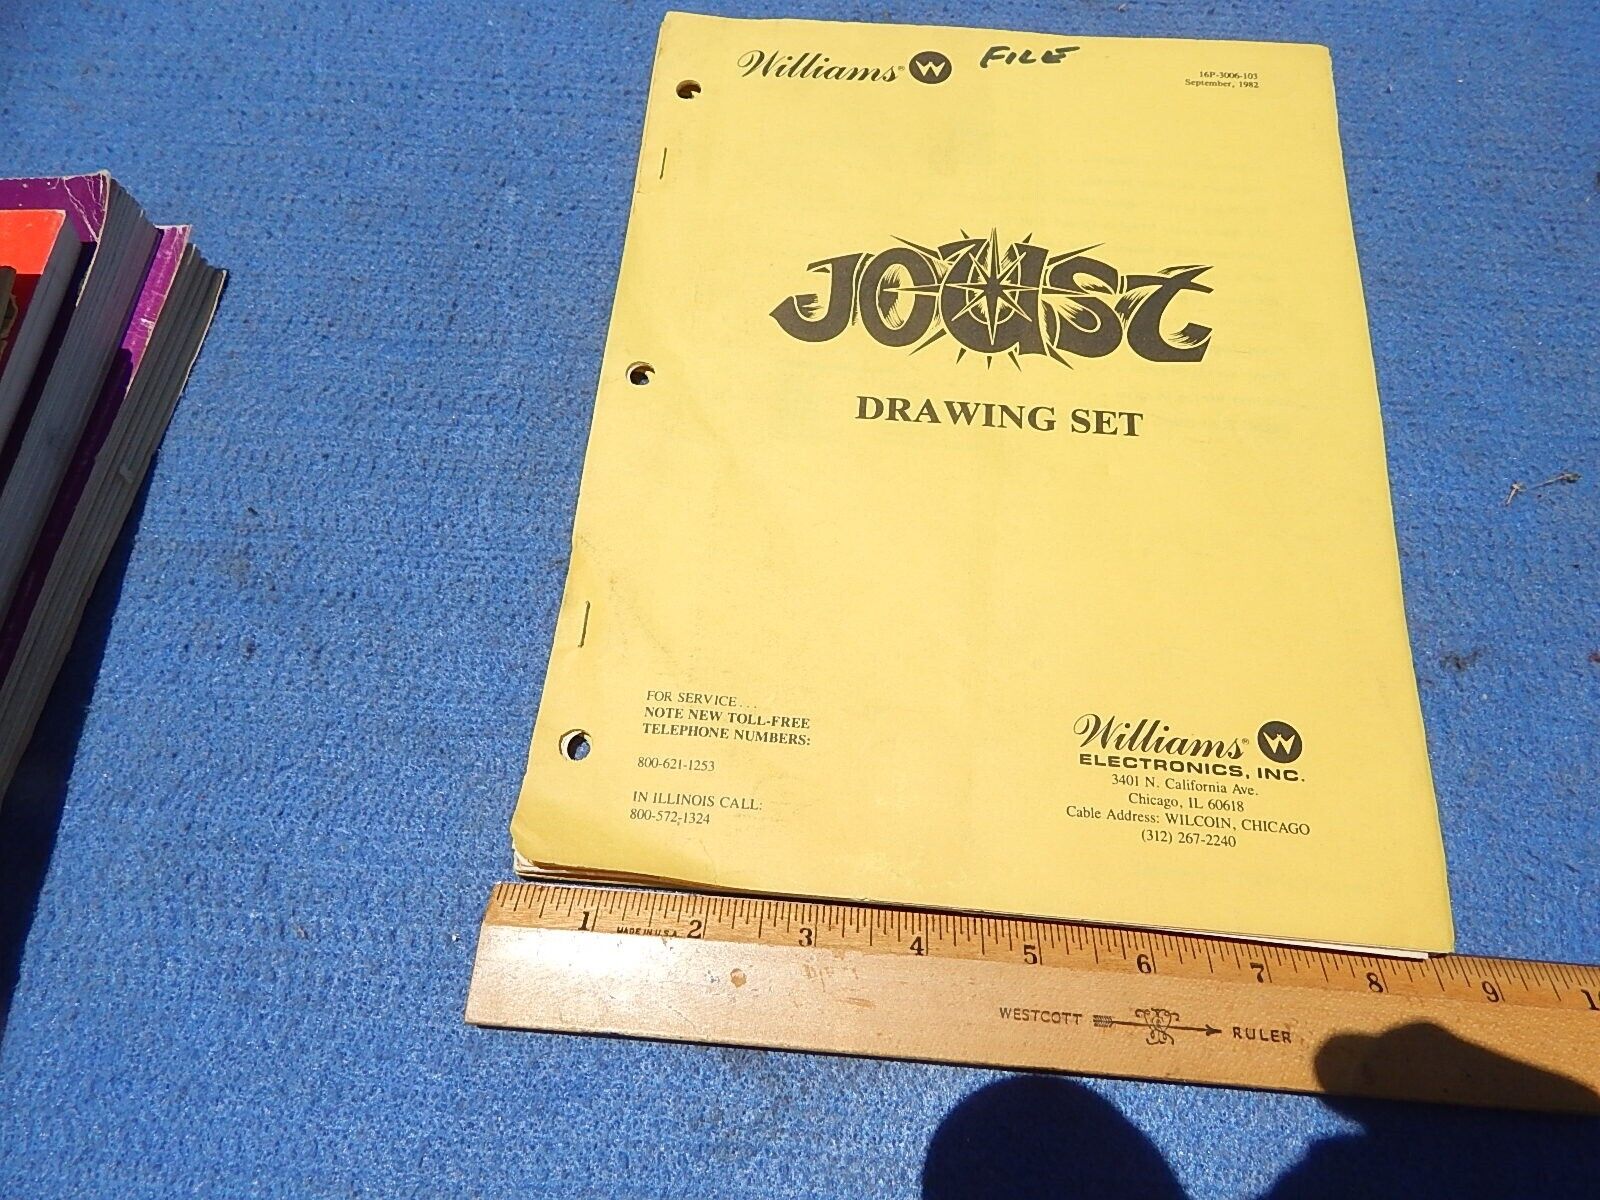 1982 Williams JOUST video game Drawing Set